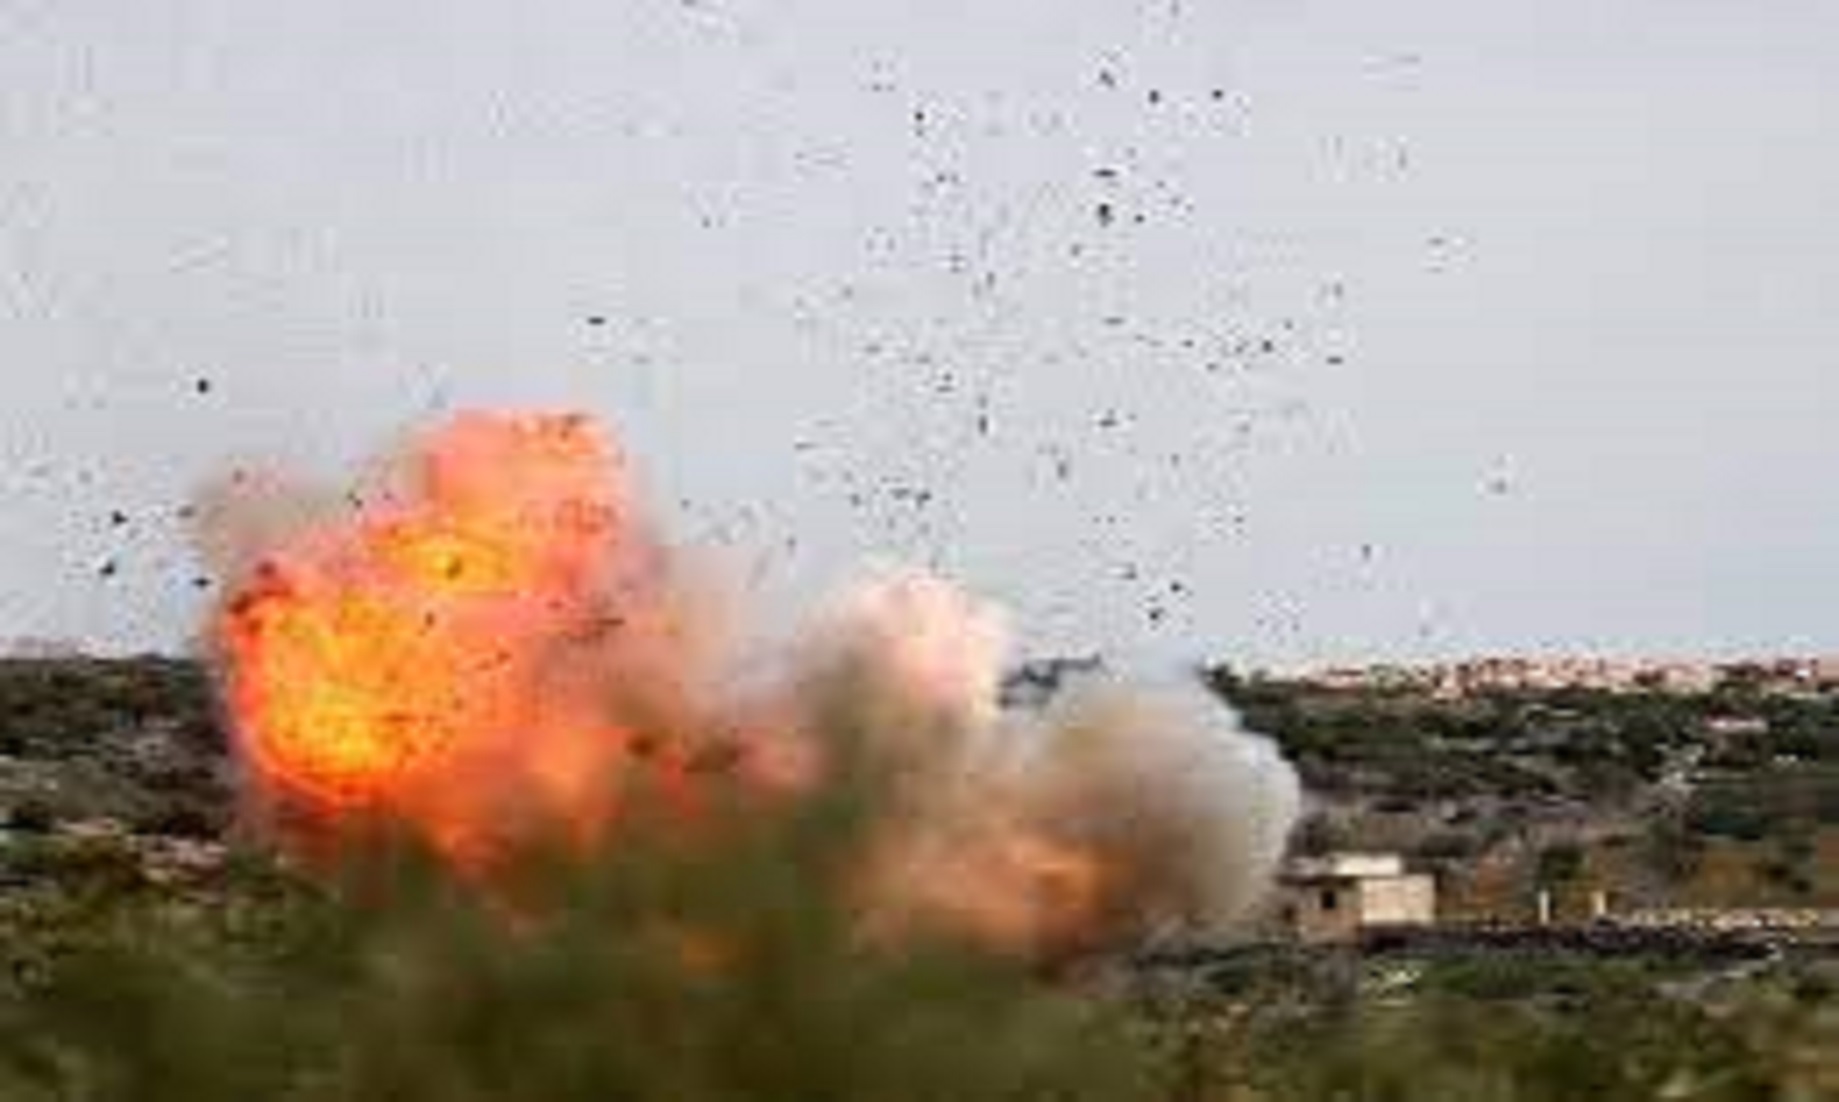 Landmine Explosion Killed Eight, Wounded 27 In Southern Syria